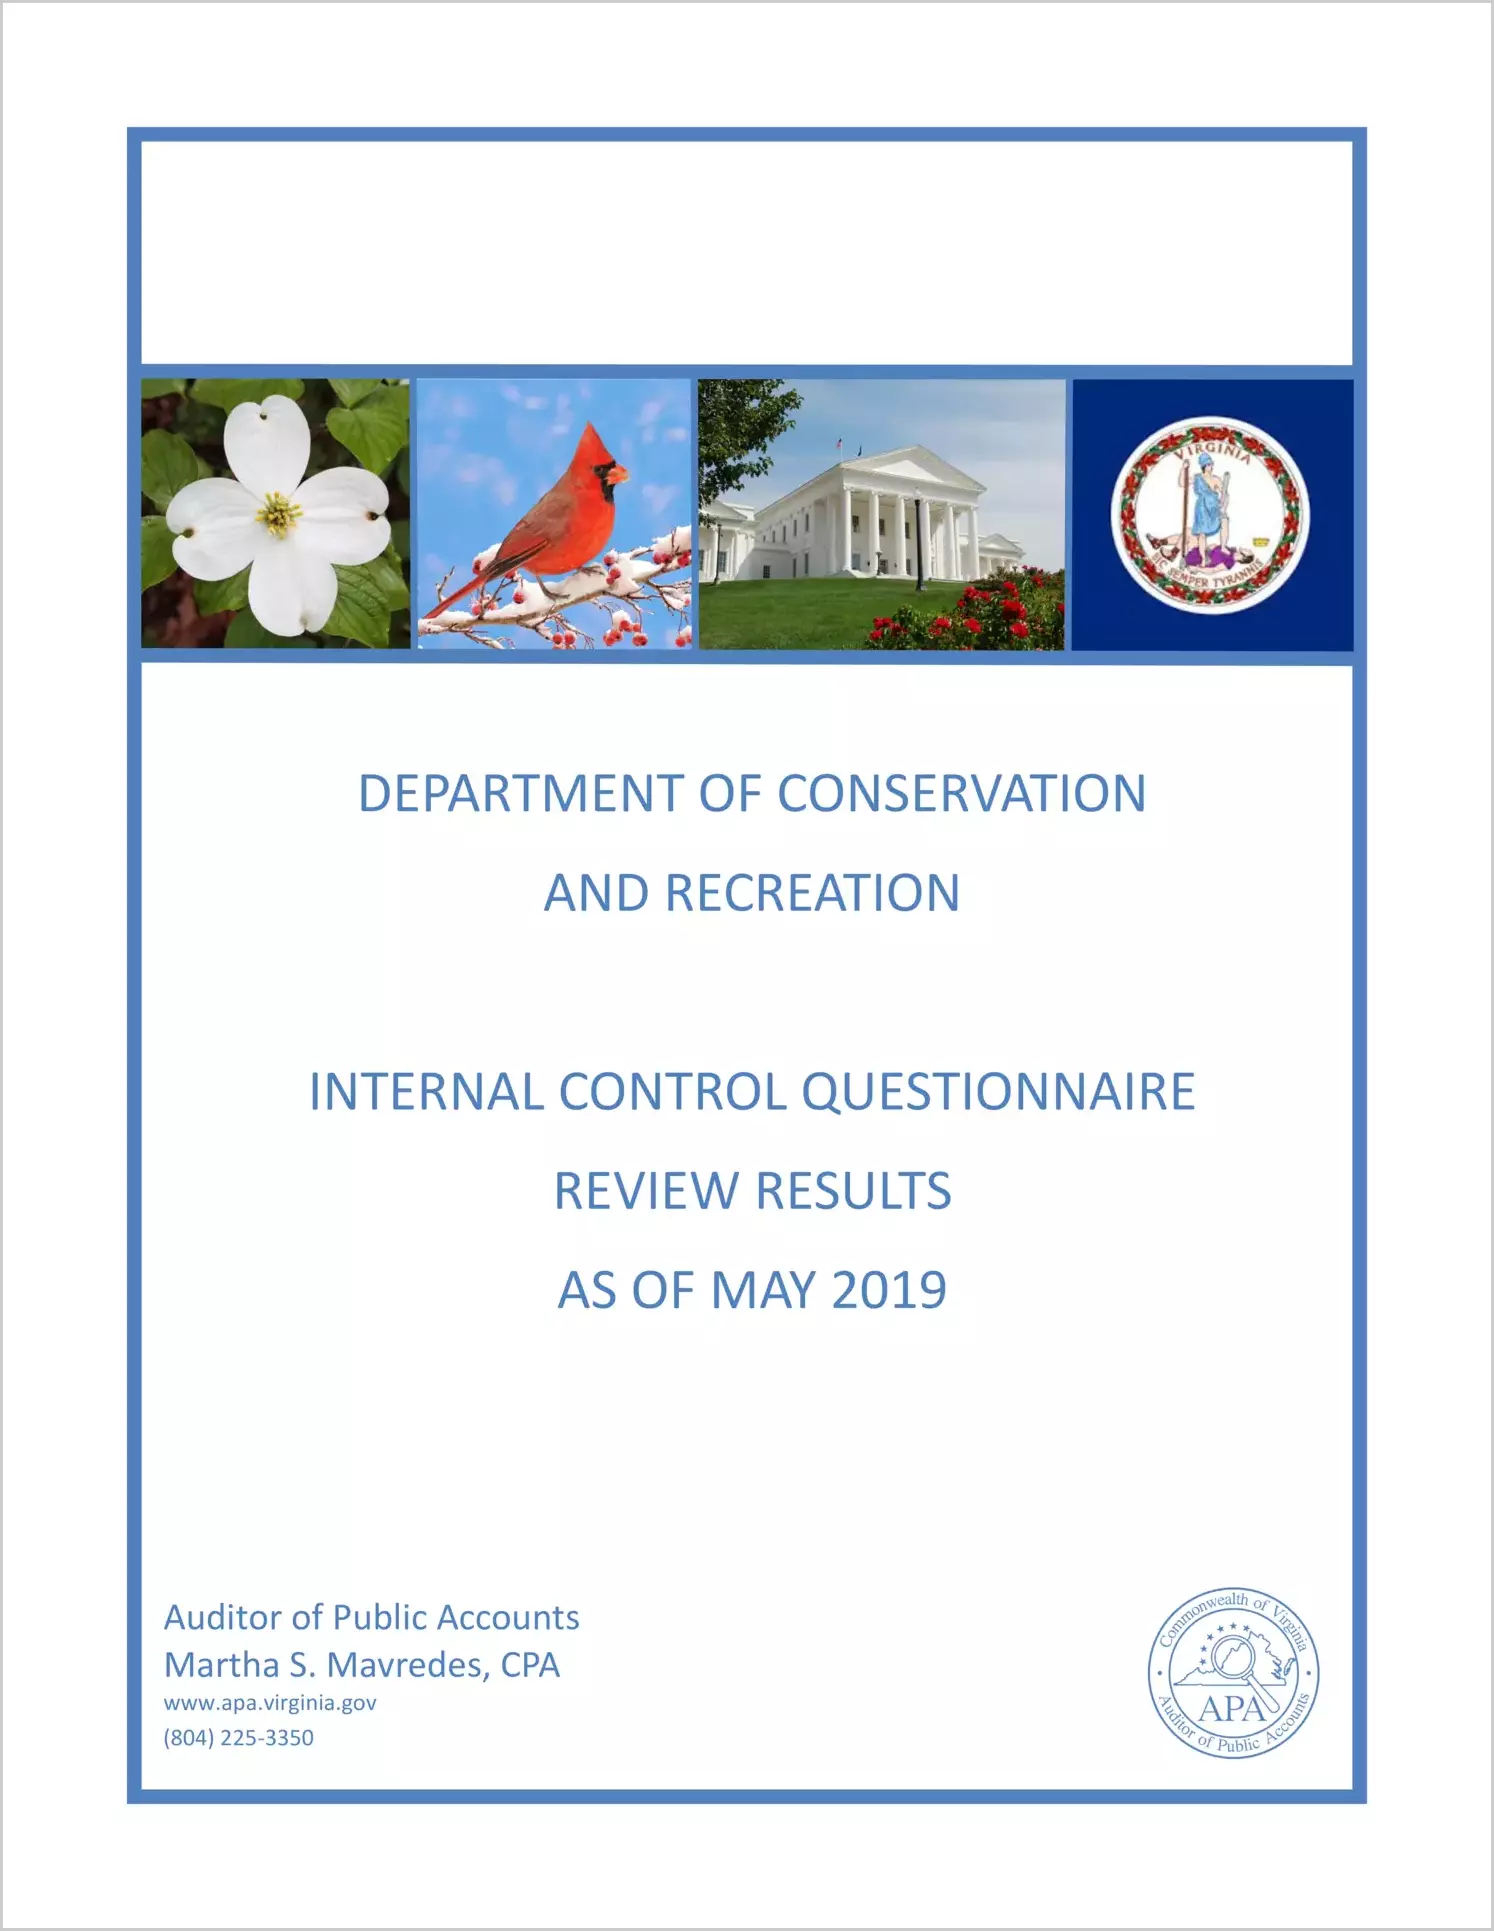 Department of Conservation and Recreation Internal Control Questionnaire Review Results as of May 2019